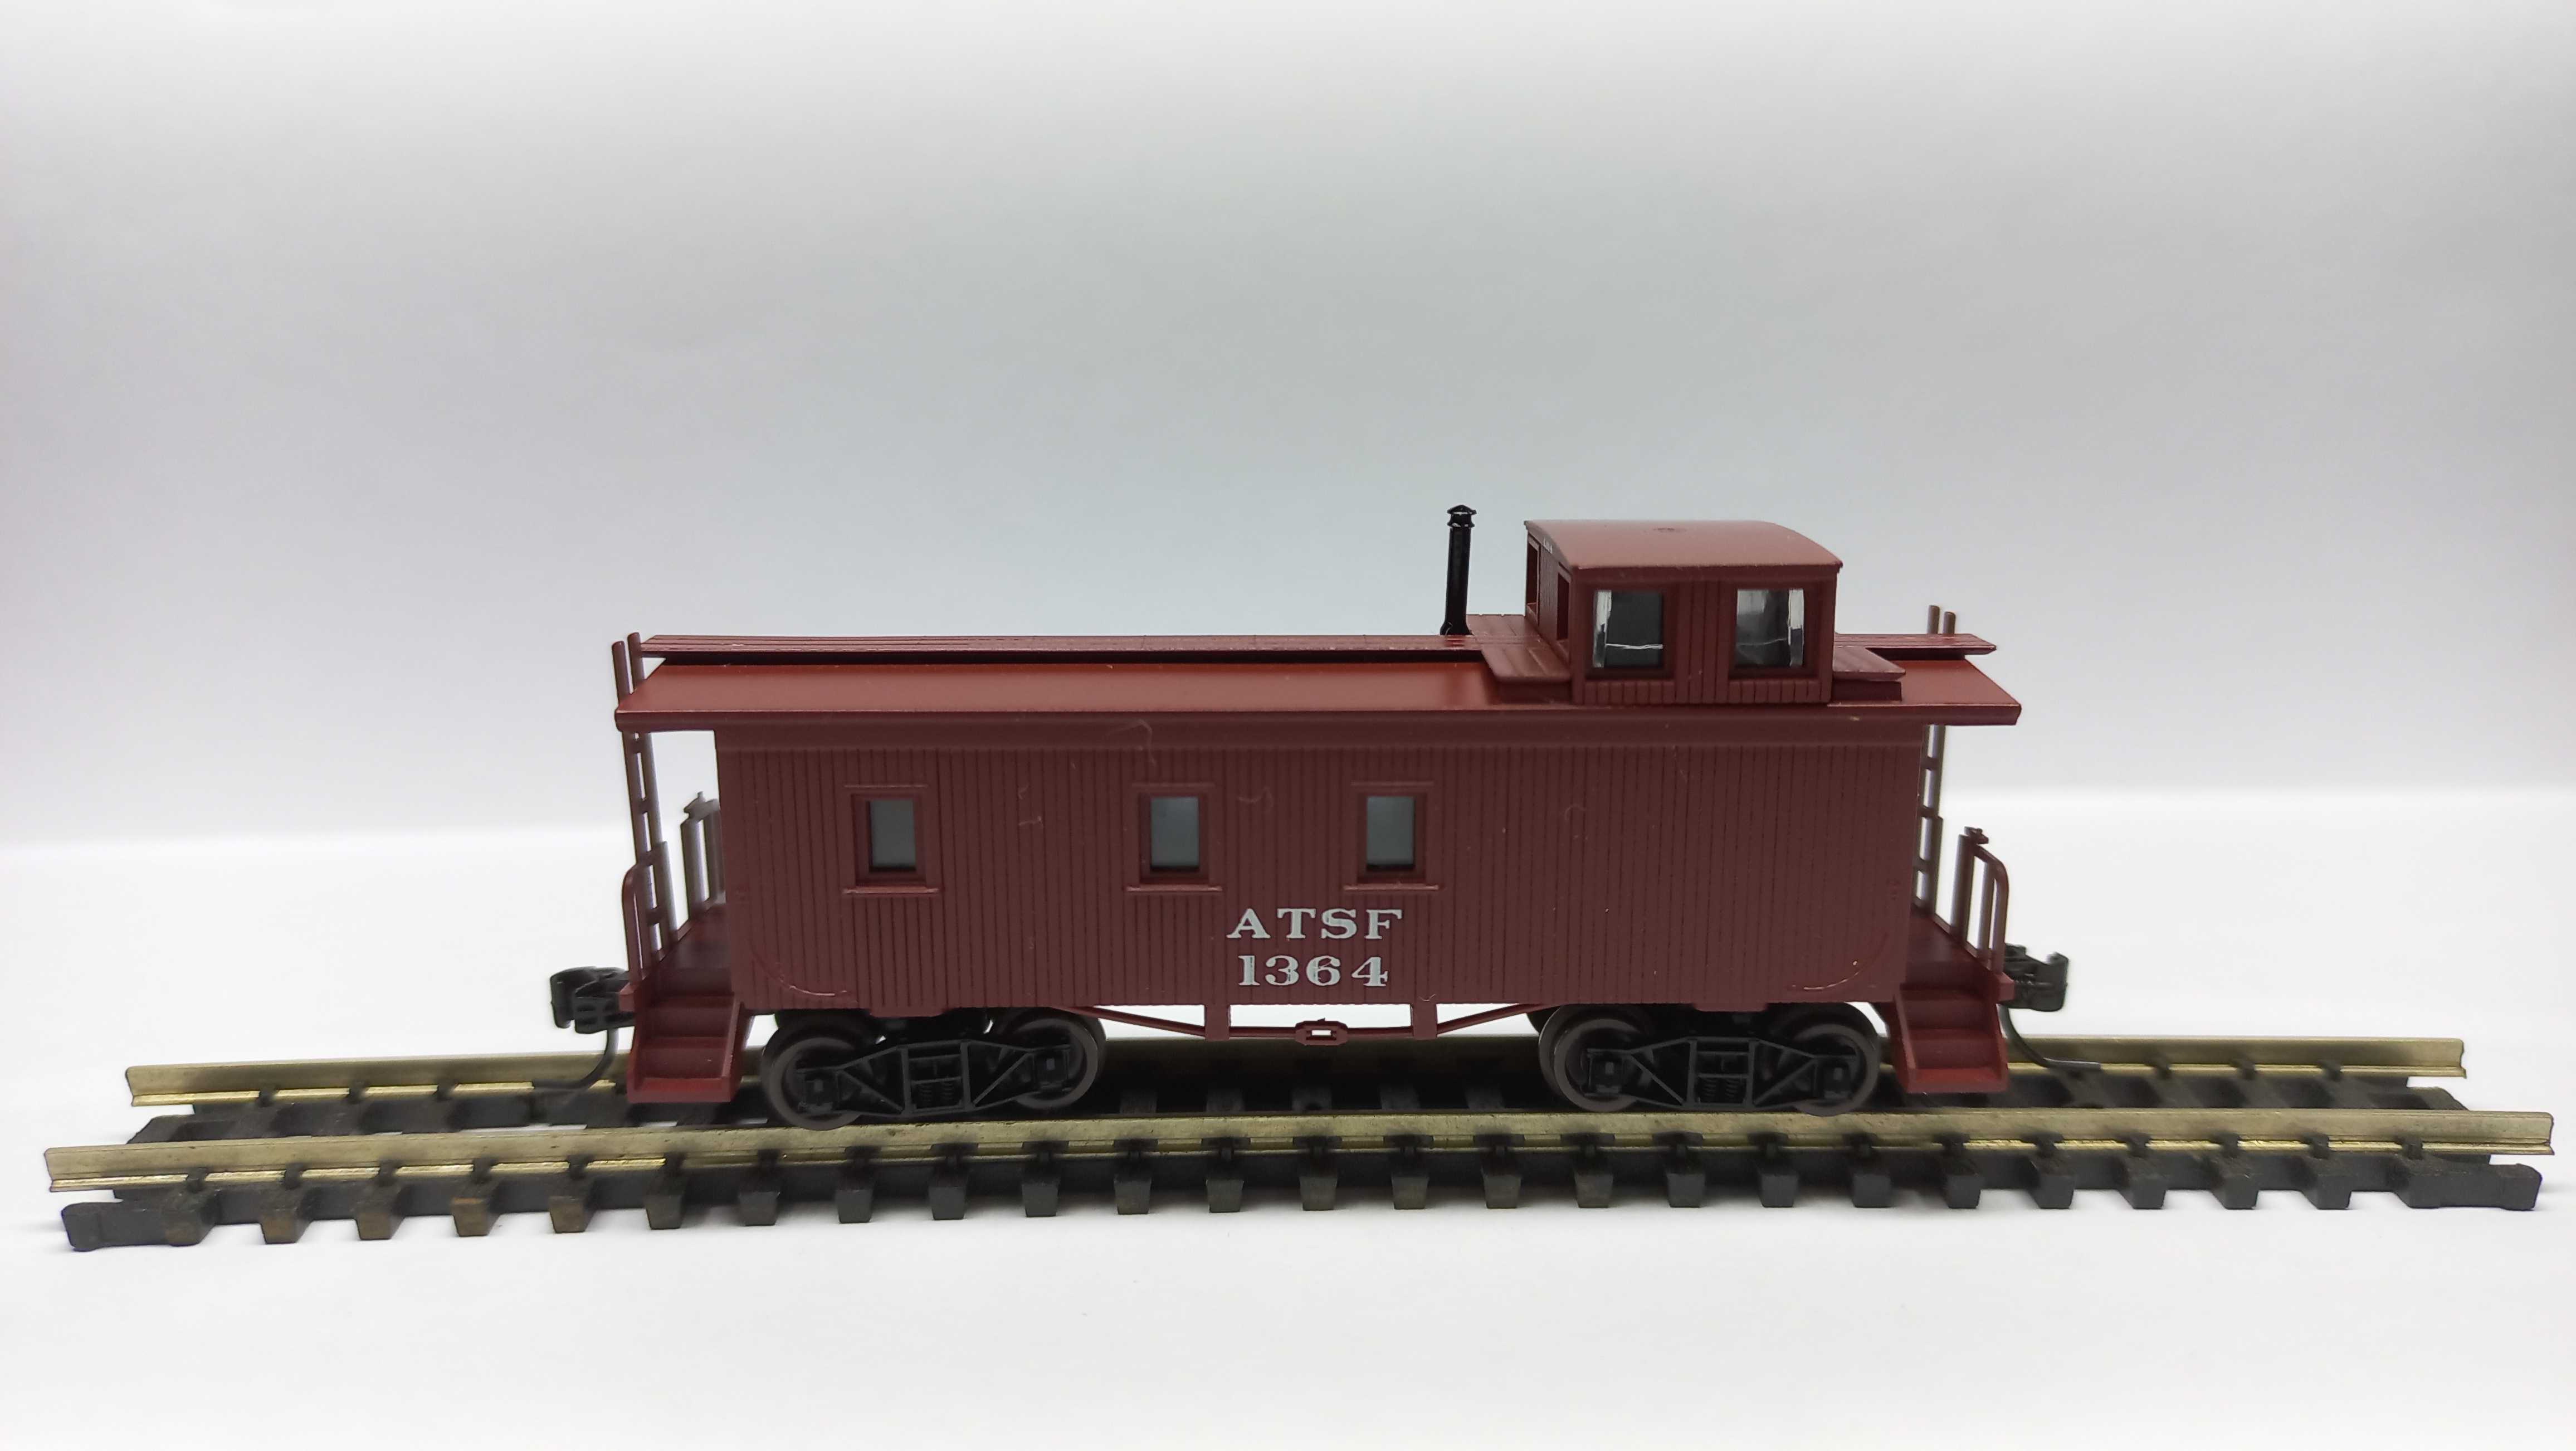 ATHEARN  11514  34' WOOD SHEATHED  CABOOSE AT&SF #1364 1:160